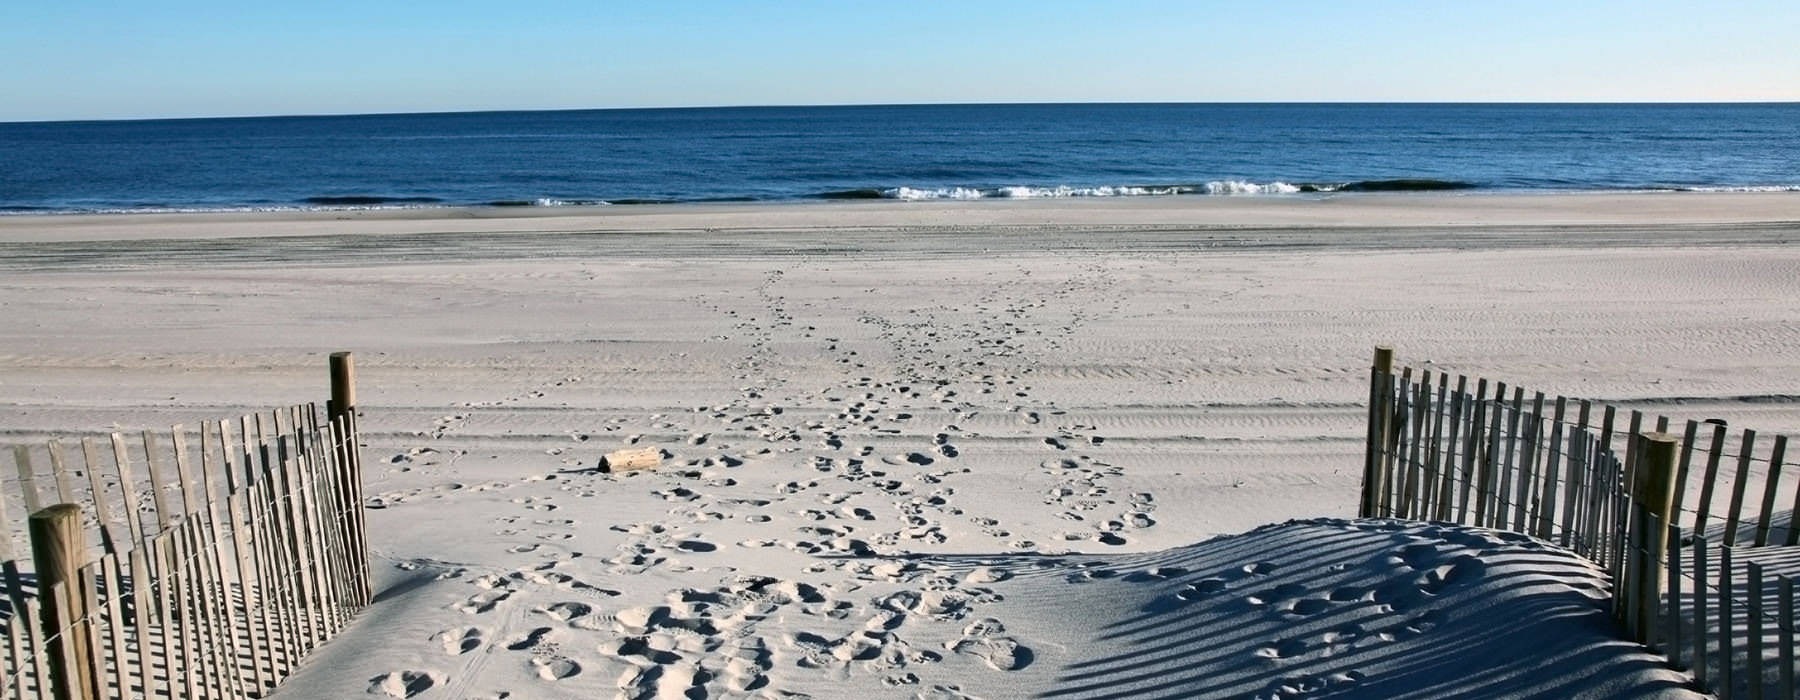 Footprints leading to ocean in the sand